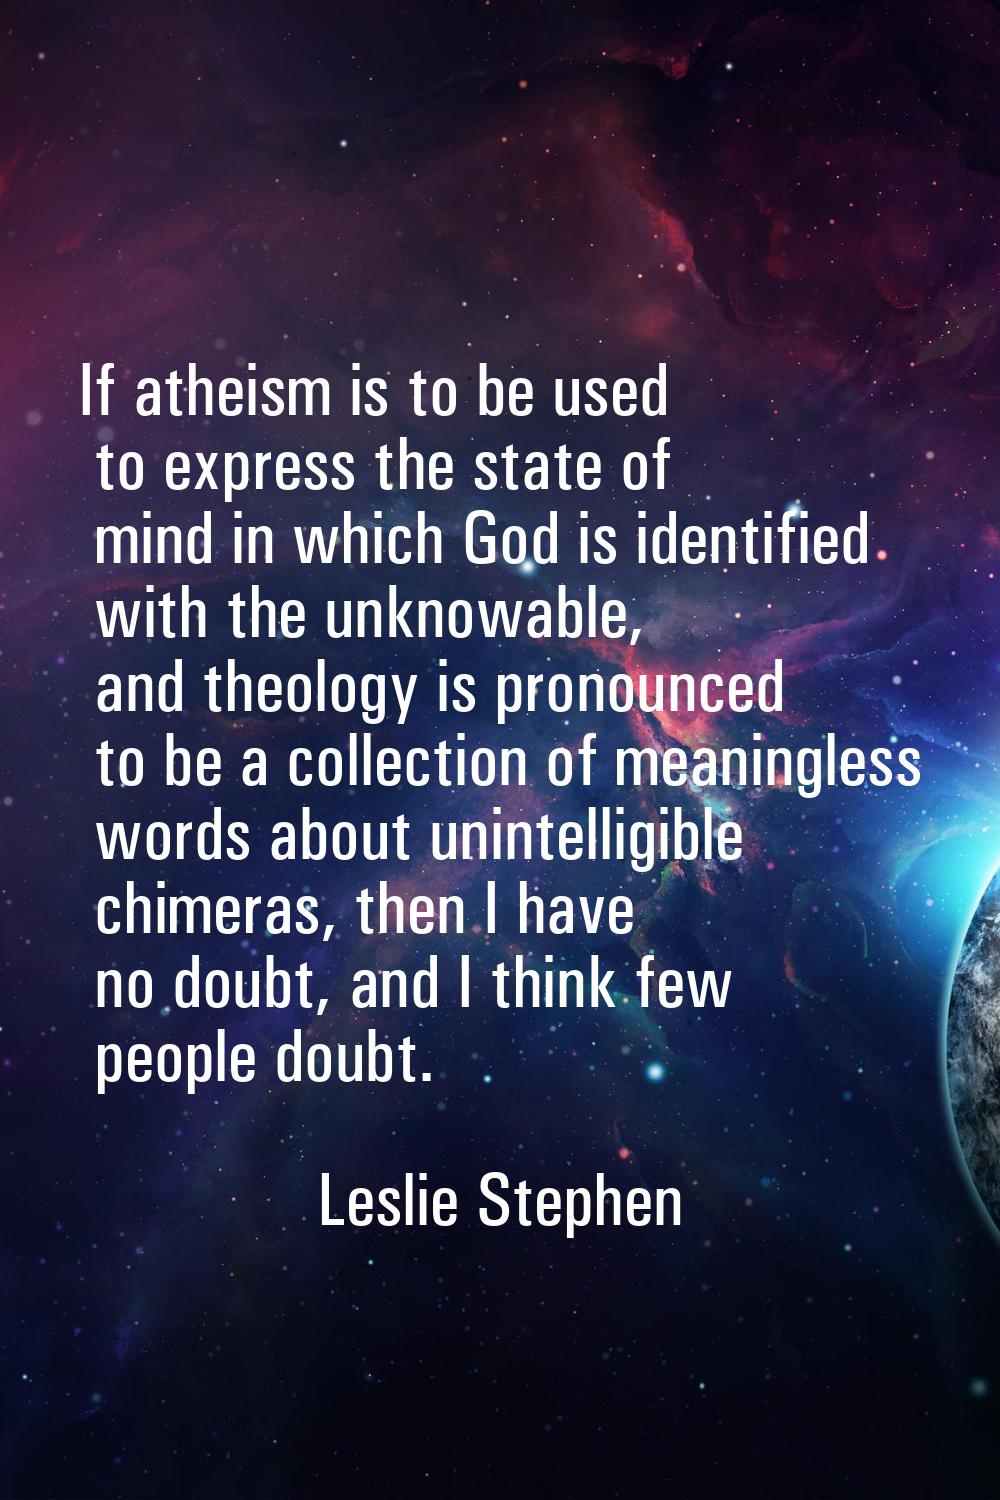 If atheism is to be used to express the state of mind in which God is identified with the unknowabl